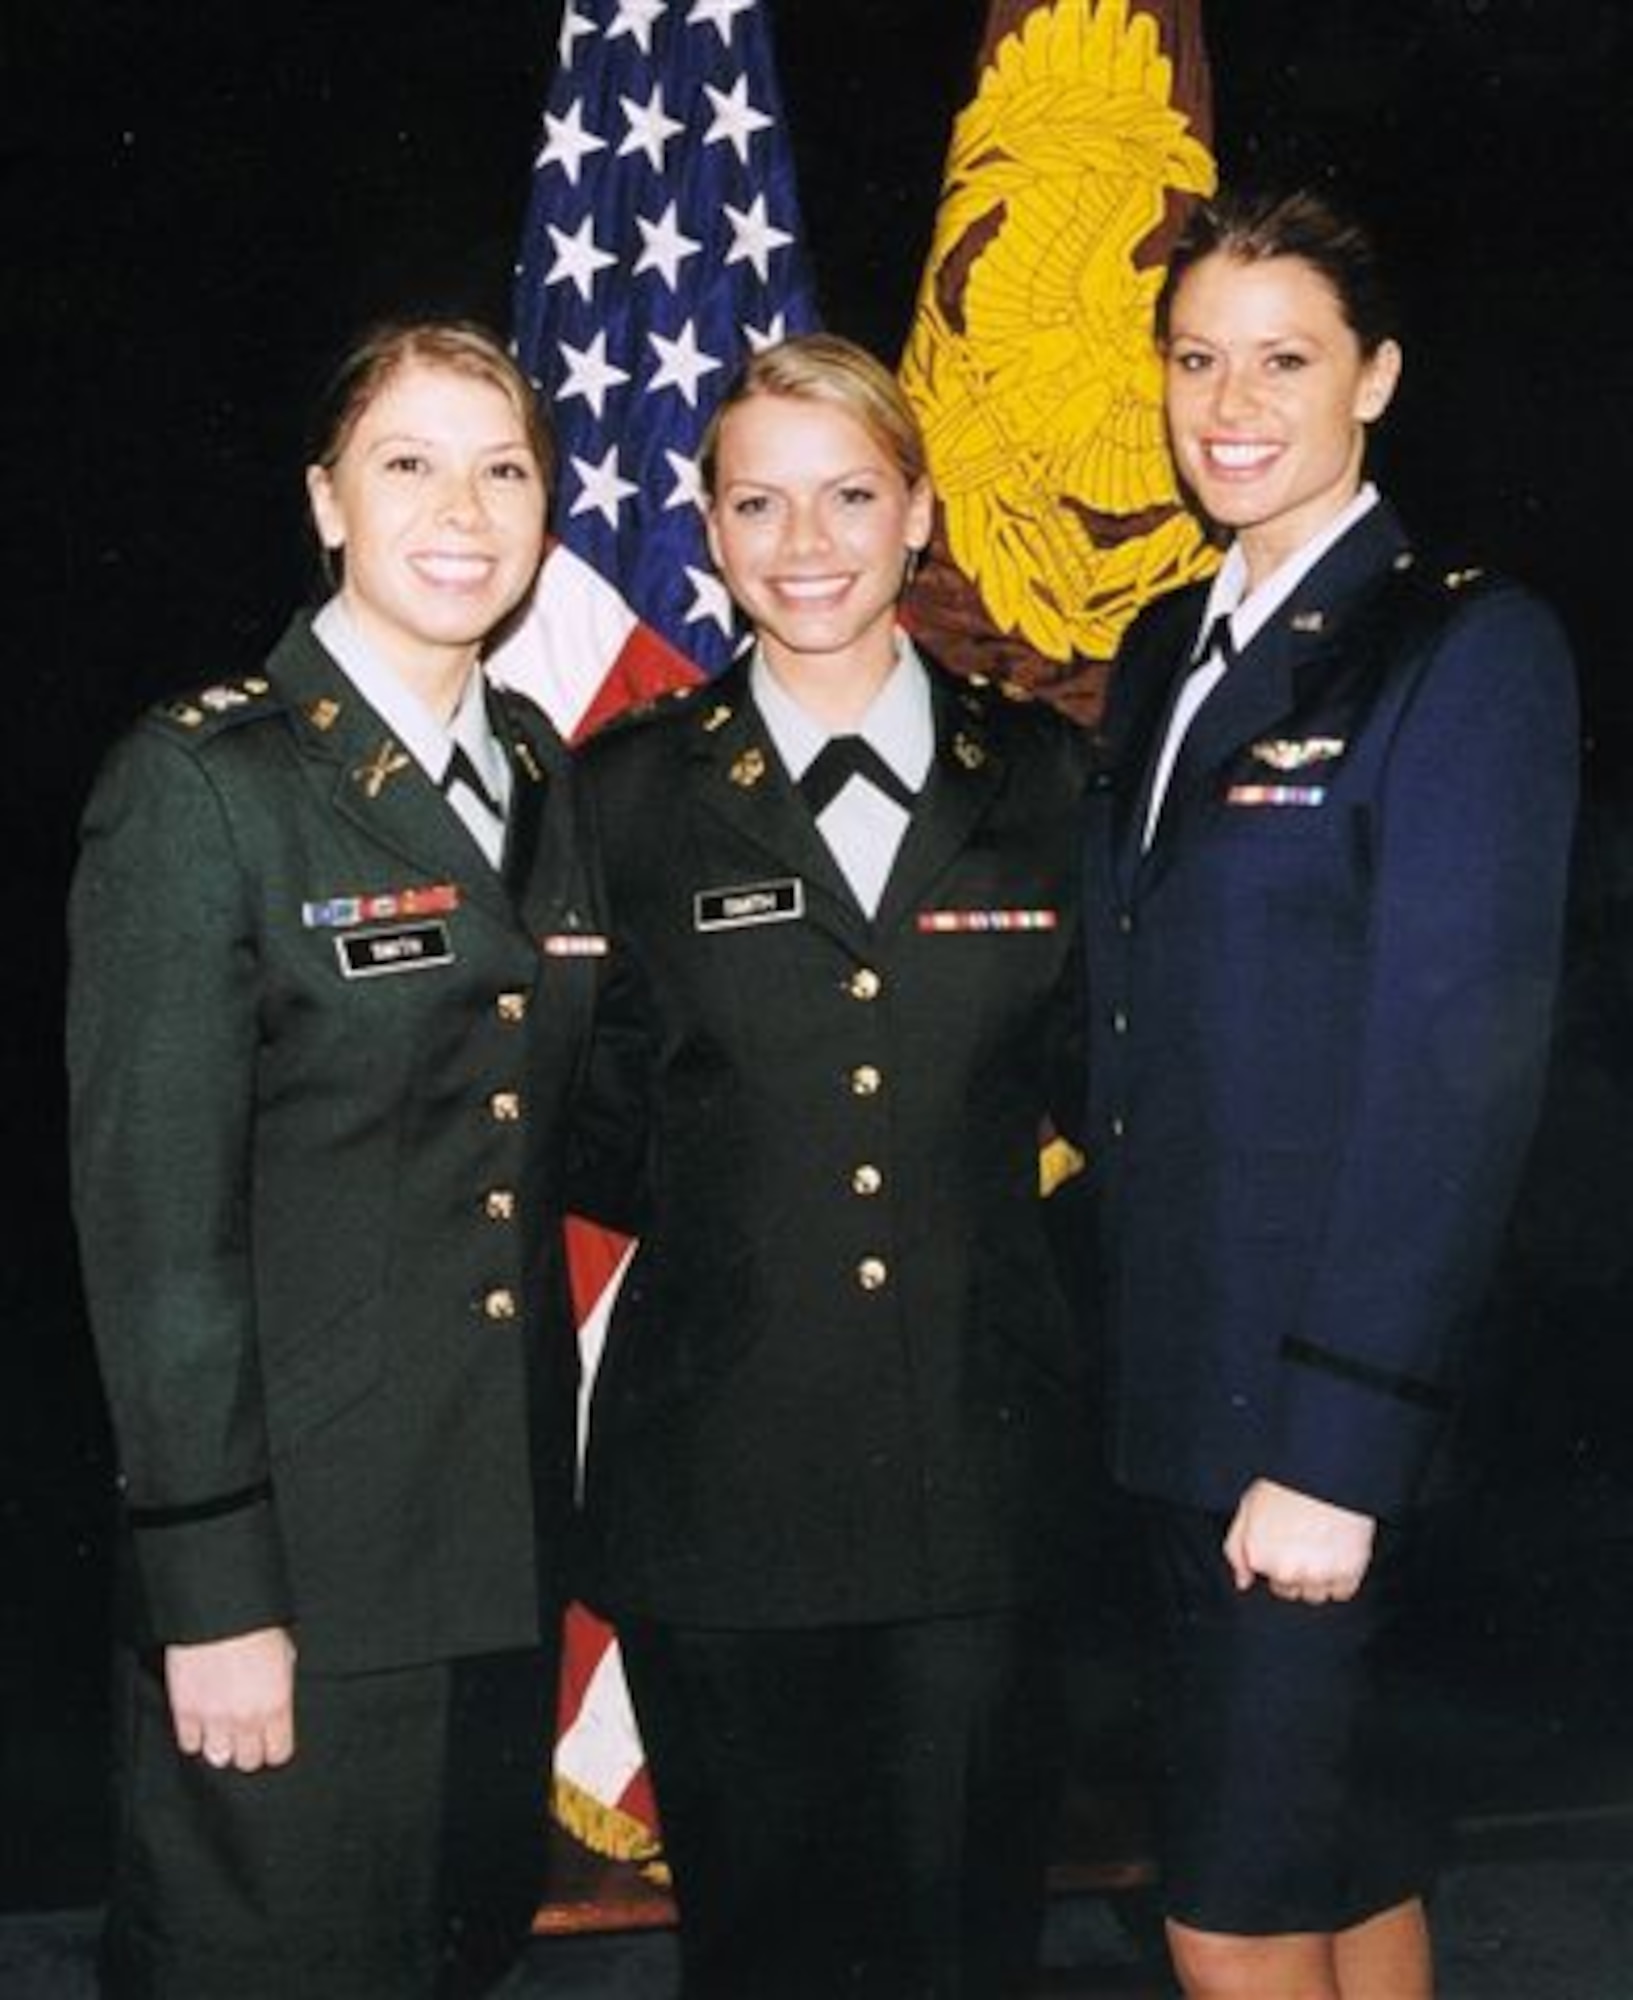 Army Chief Warrant Officer Amber Smith (left) and Air Force Capt. Kelly Smith (right) celebrate at a graduation for their younger sister, Army Chief Warrant Officer Lacey Smith (center). All three Smith sisters are pilots in the armed forces. (Courtesy photo)